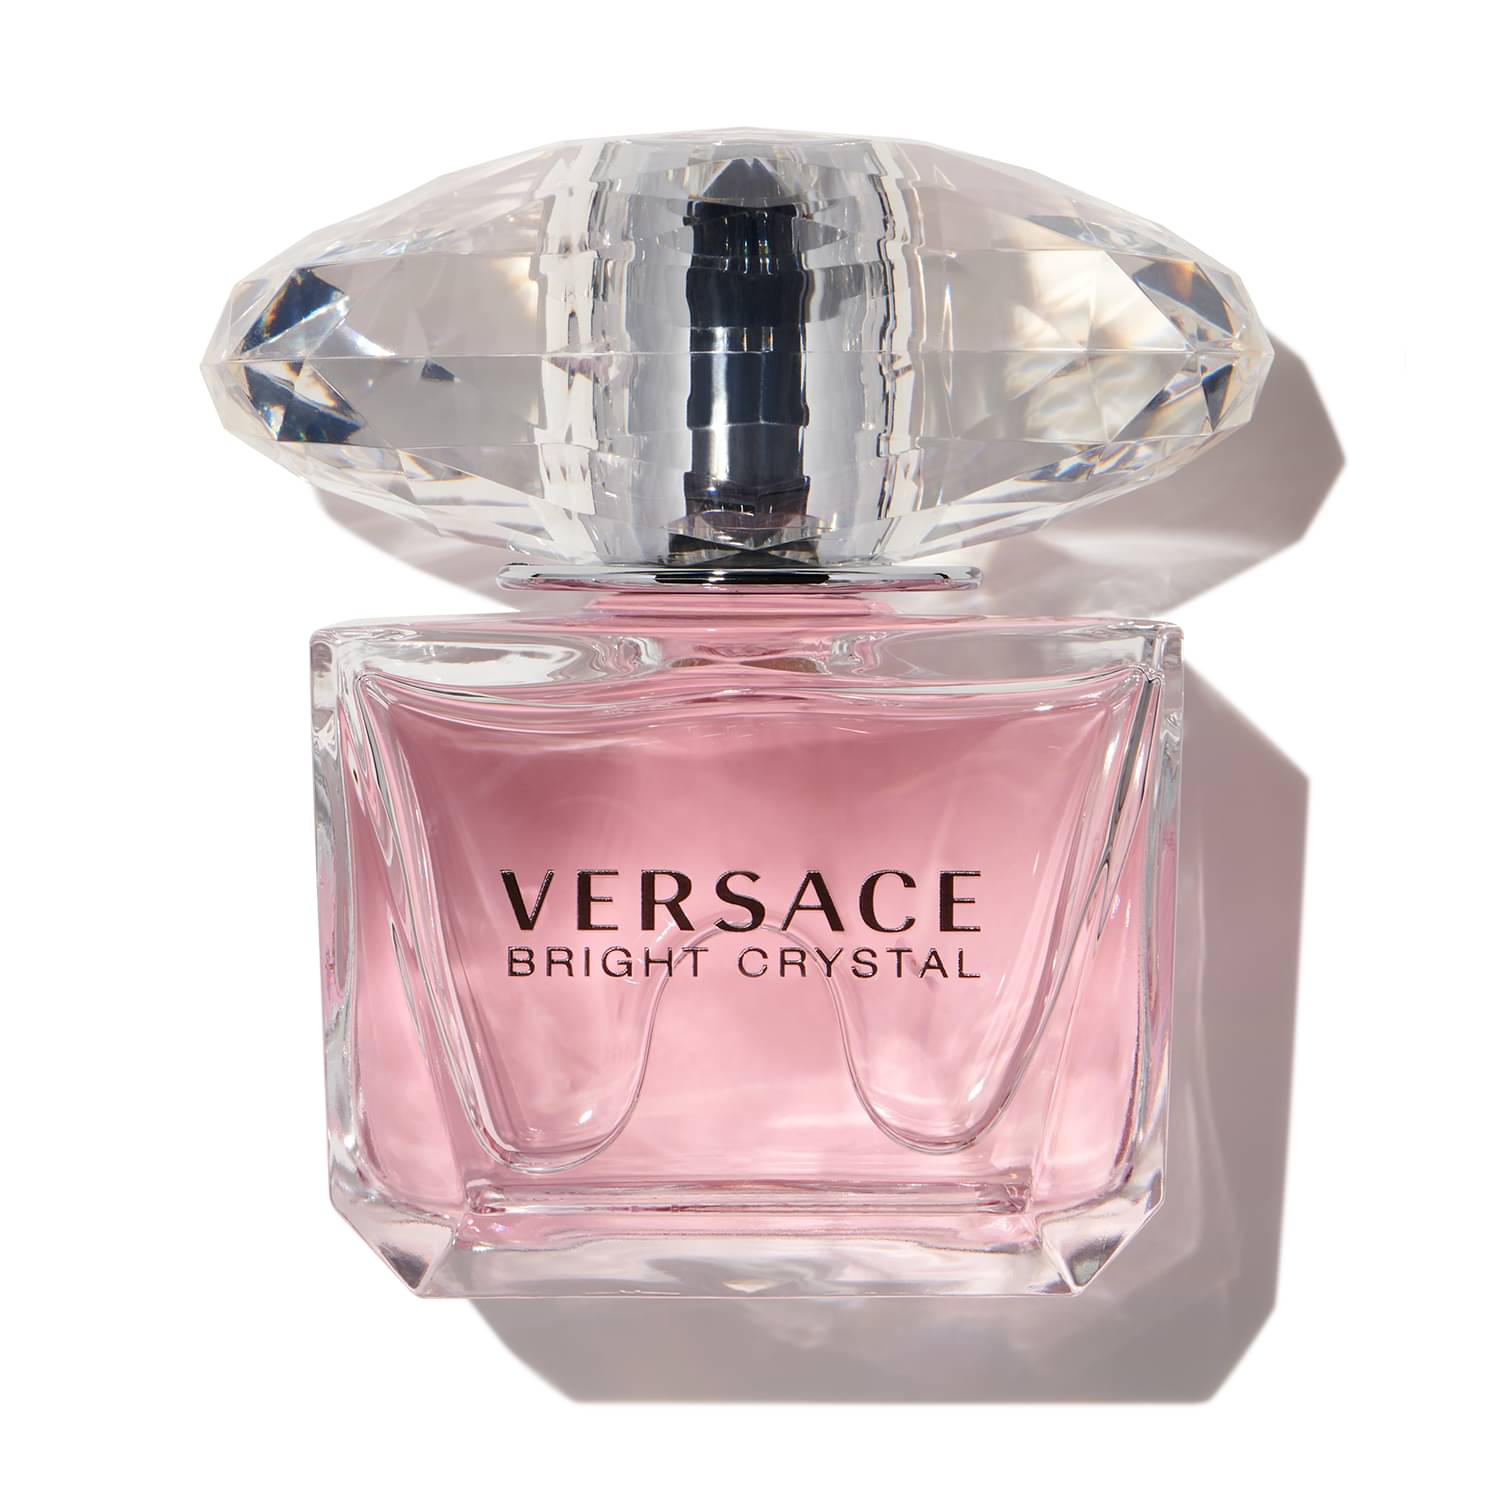 Versace Bright Crystal Fragrance - Women's Fragrance in Pink